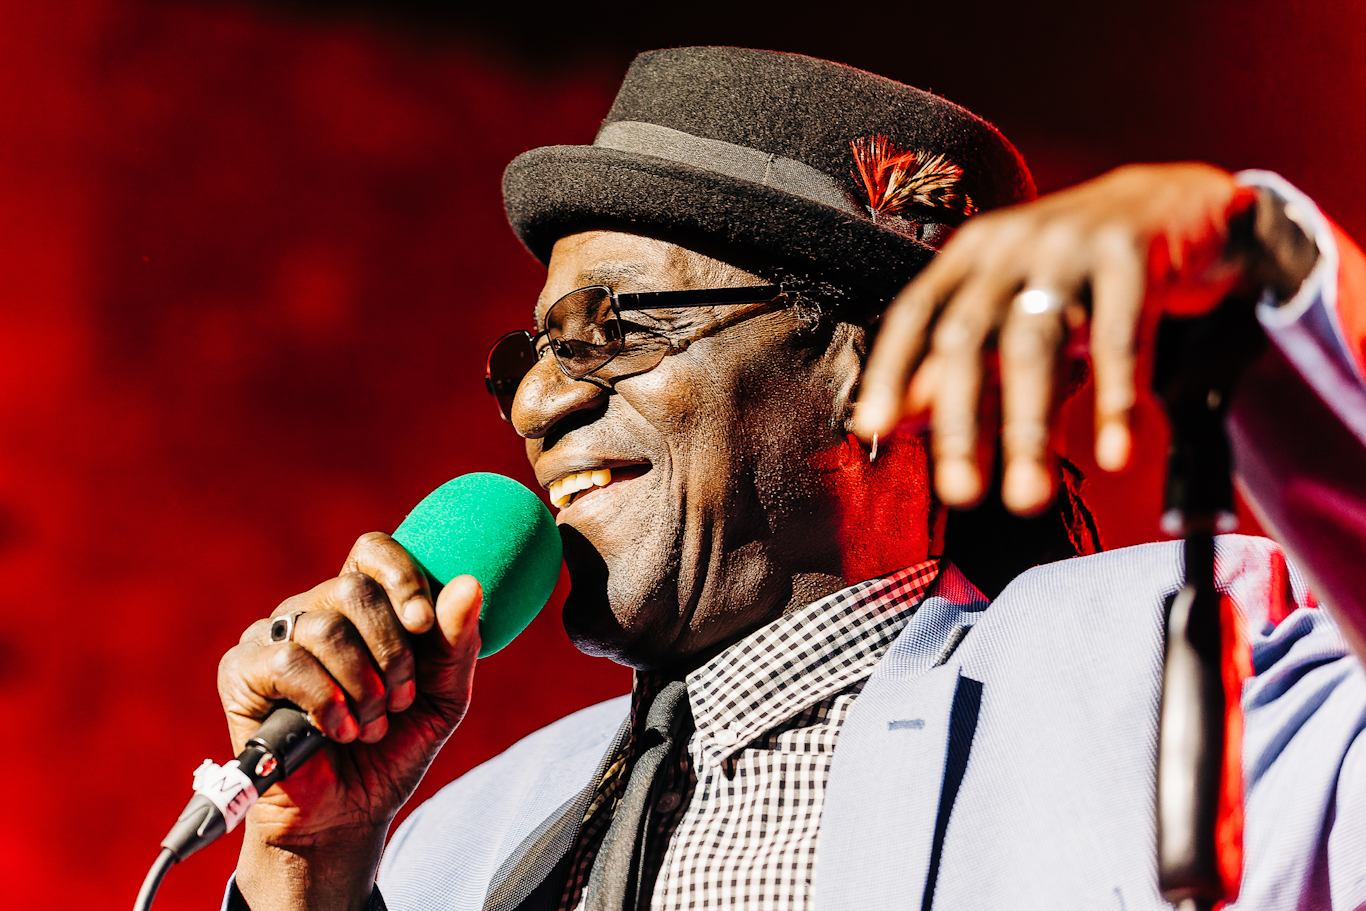 LIVE REVIEW: Neville Staple Band at Boiler Shop, Newcastle upon Tyne, 15th October 2022